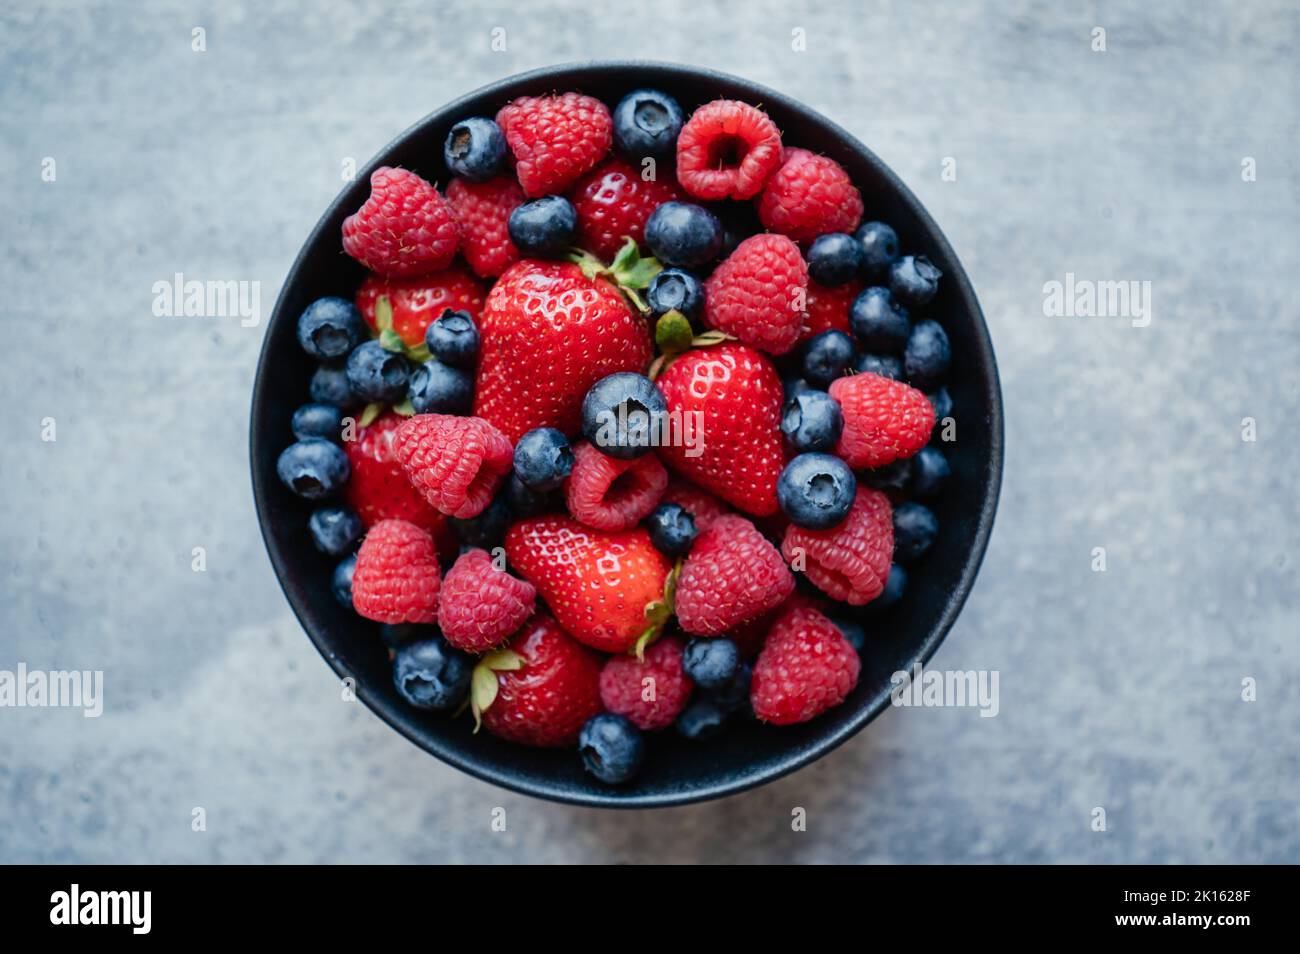 Top view of bowl of fresh mixed berries on grey background. Stock Photo